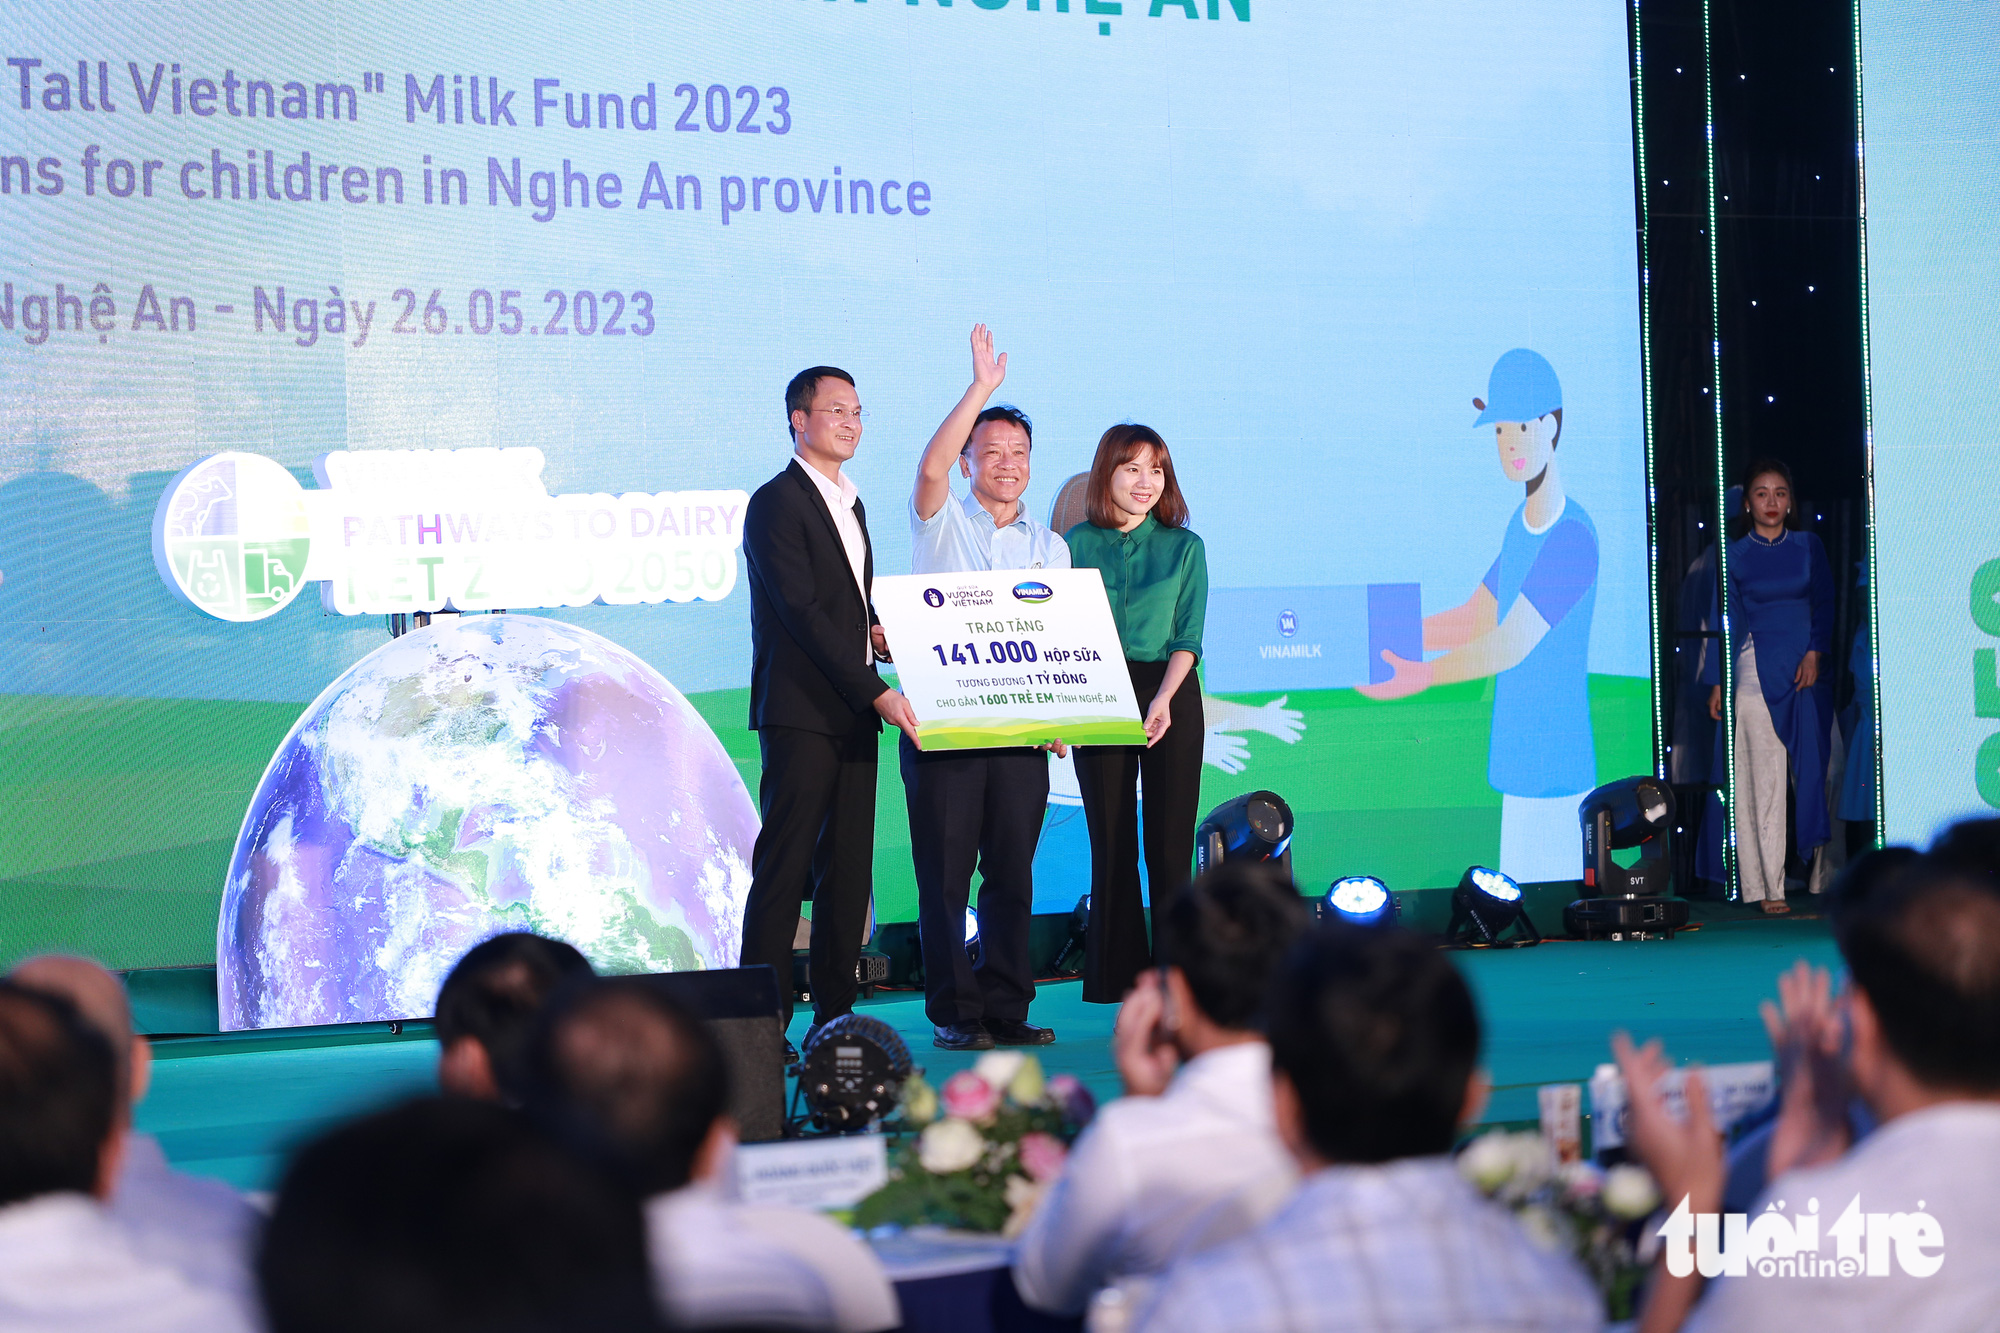 Representatives of the National Fund for Vietnamese Children and Nghe An Dairy Factory donate milk to children in Nghe An. Photo: Doan Hoa / Tuoi Tre